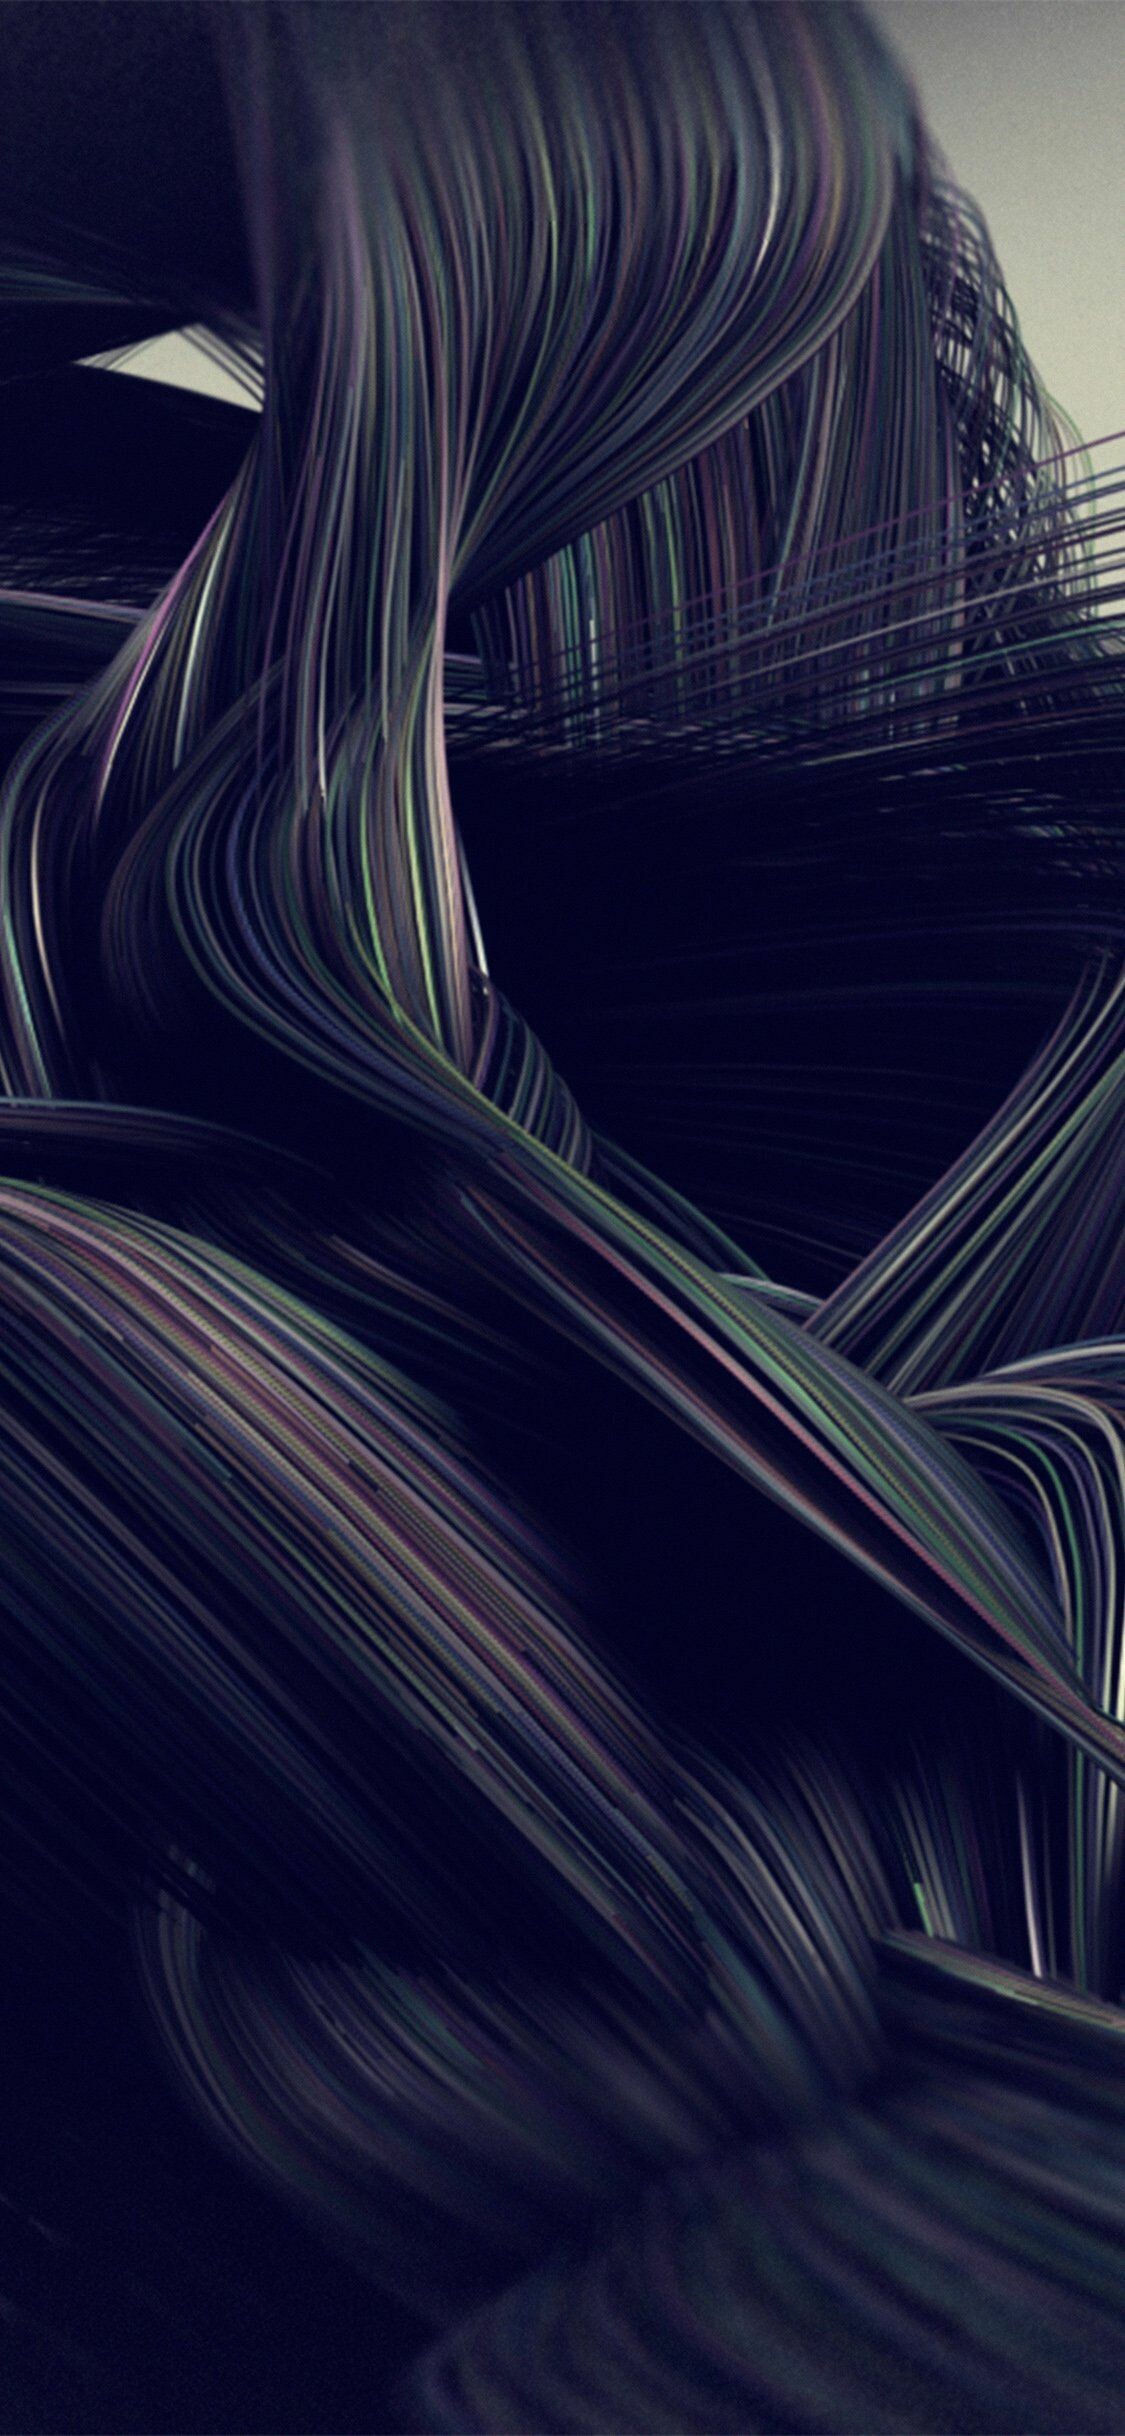 Abstract Art Iphone Wallpapers